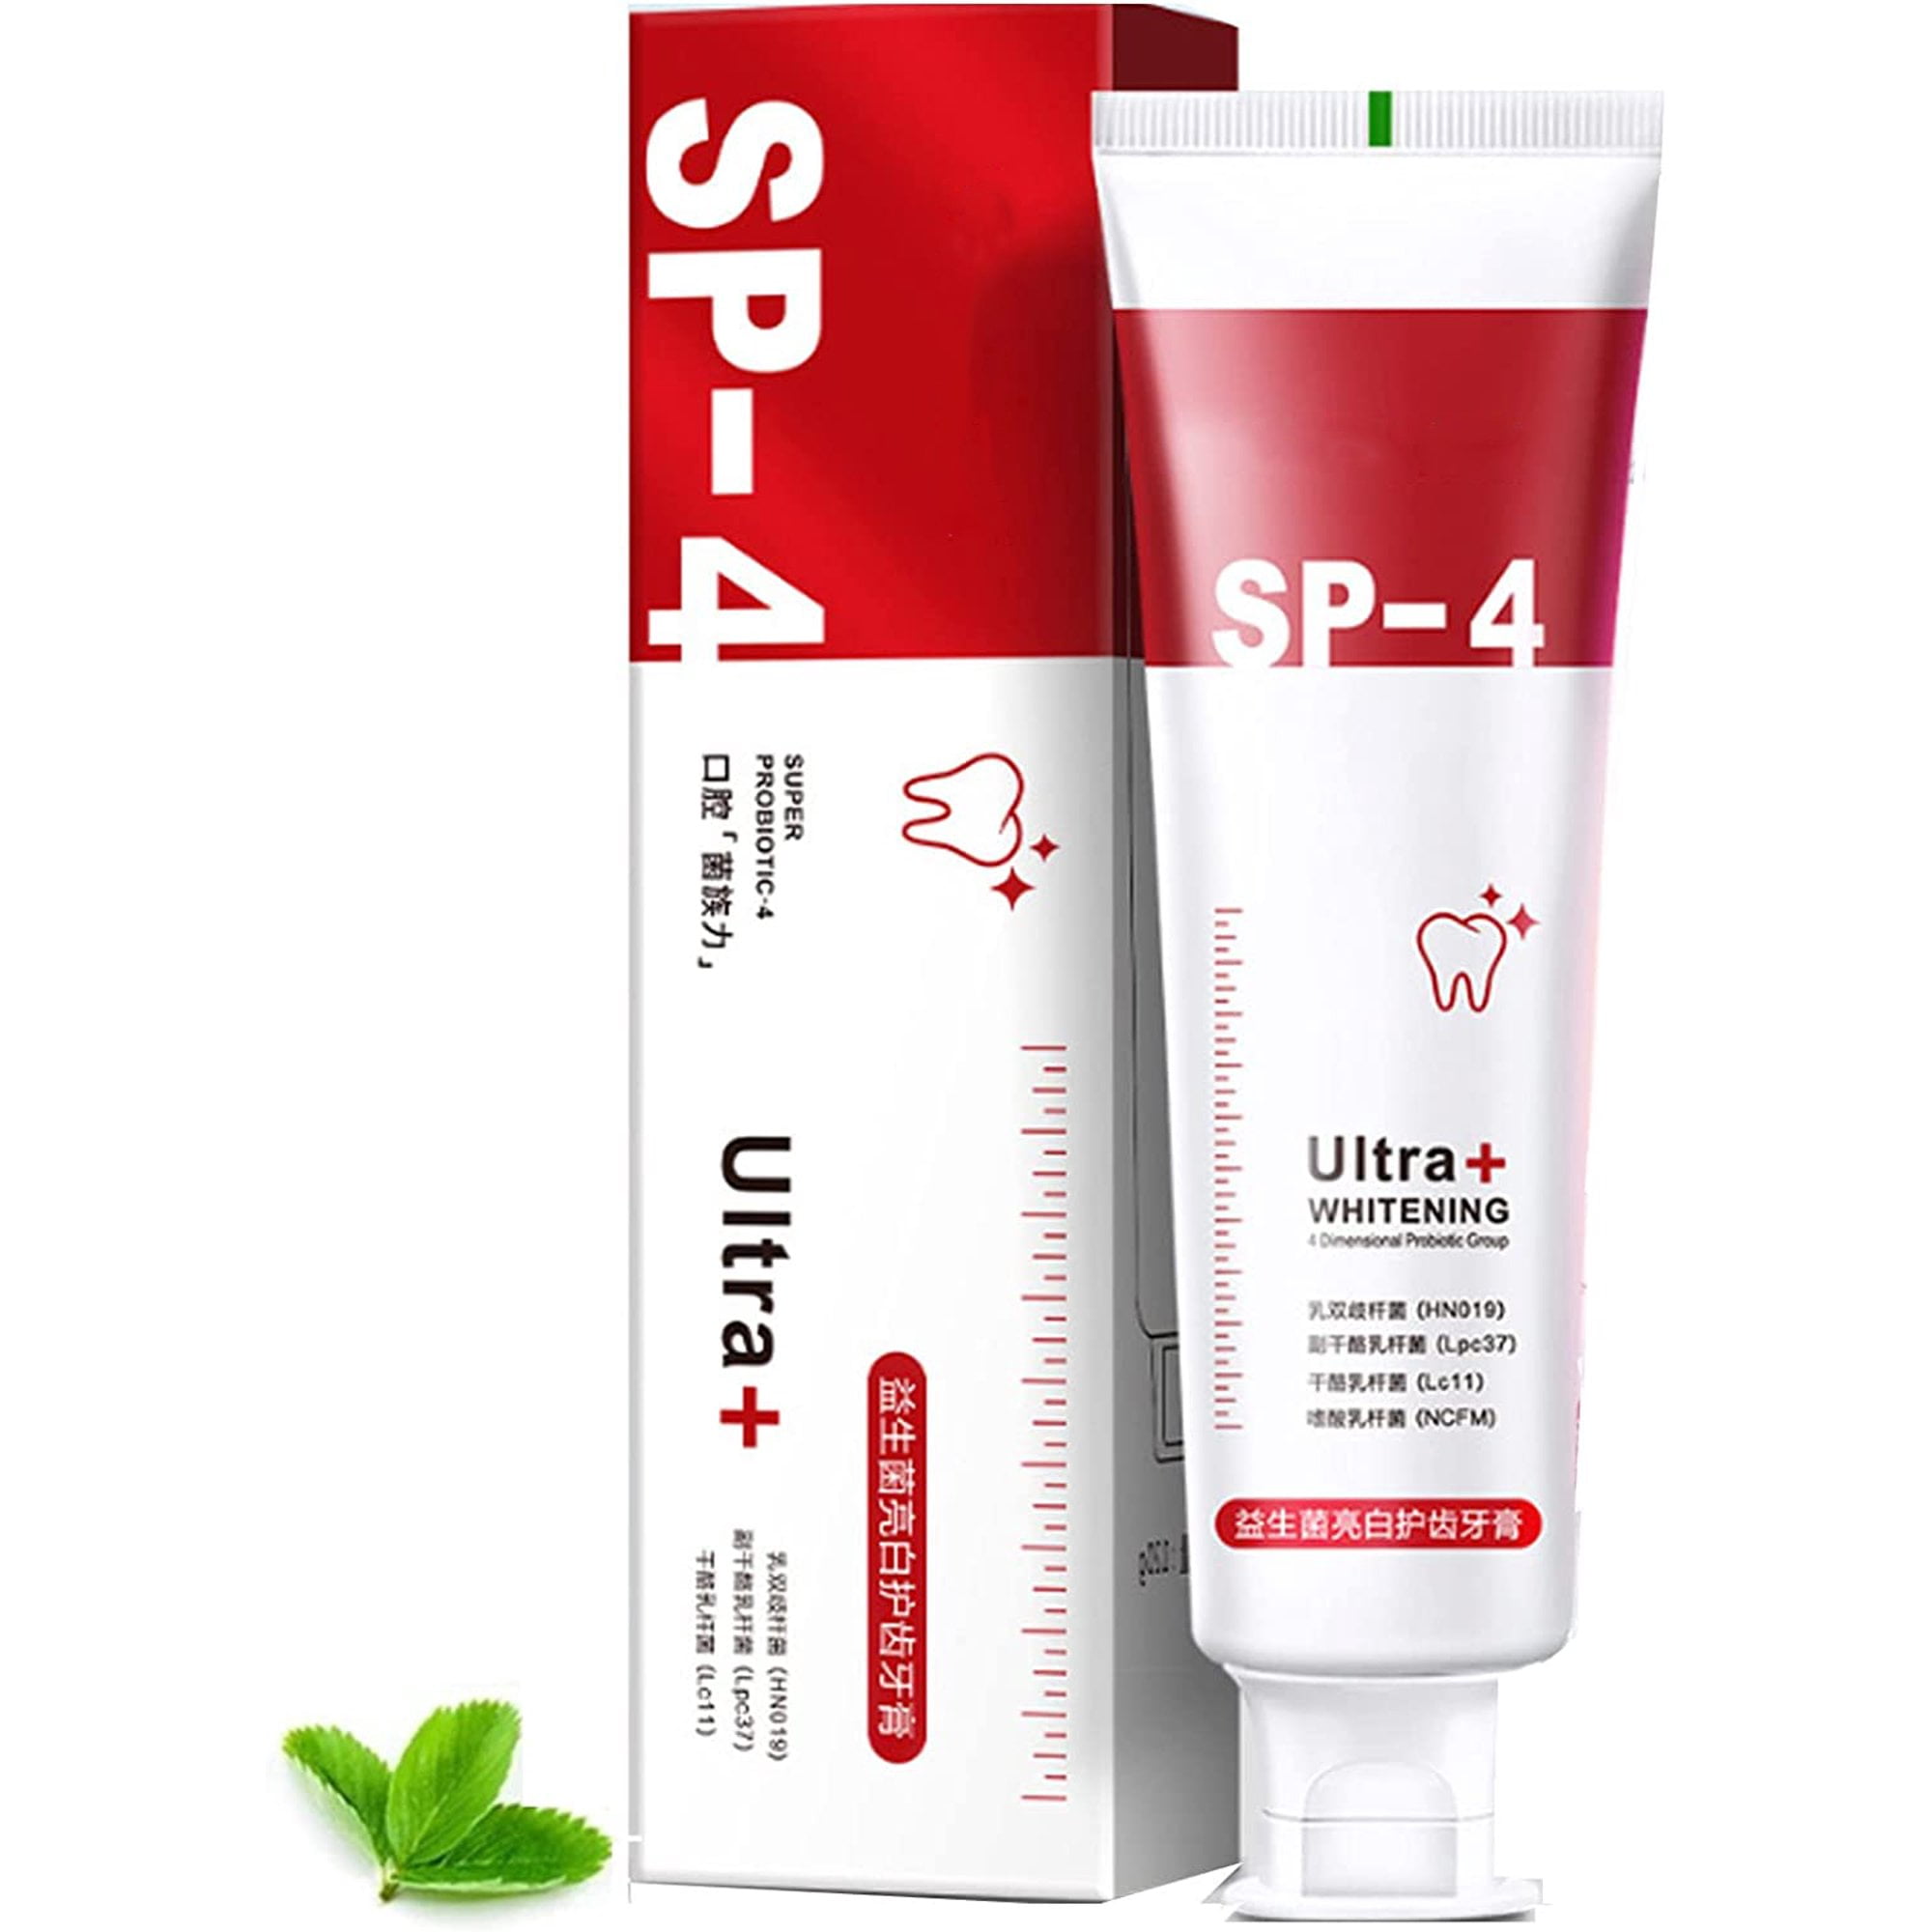 Sp-4 Toothpaste, SP-4 Brightening & Stain Removing Toothpaste